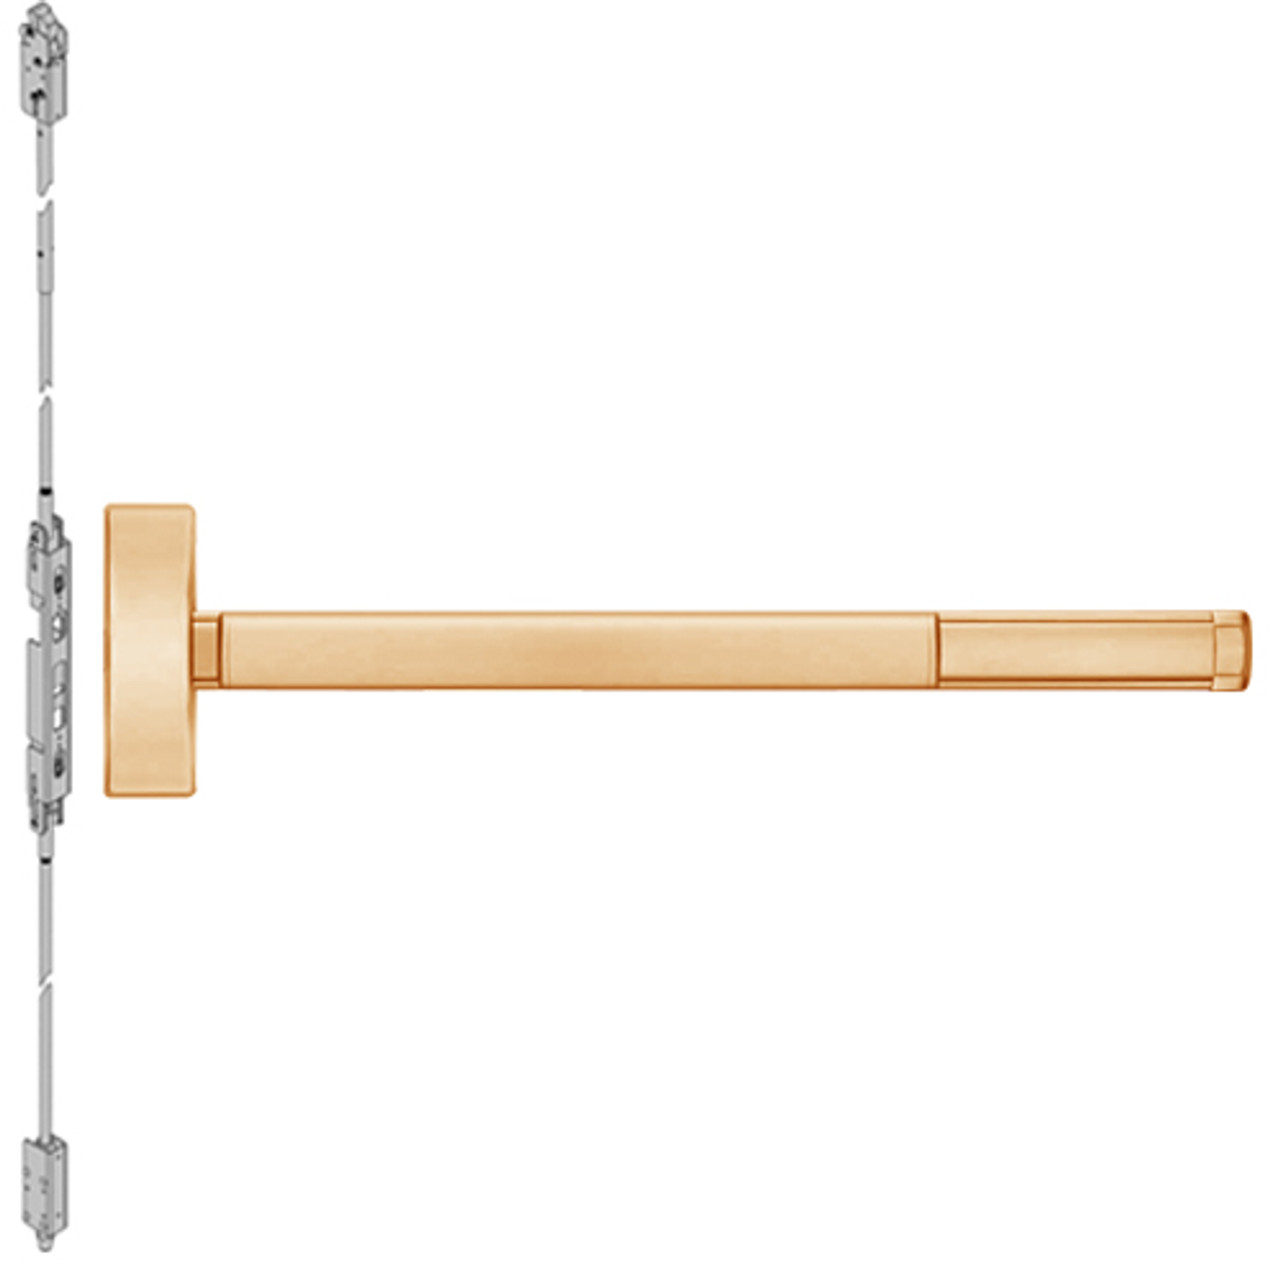 TS2815-612-48 PHI 2800 Series Concealed Vertical Rod Exit Device with Touchbar Monitoring Switch Prepped for Thumbpiece Always Active in Satin Bronze Finish